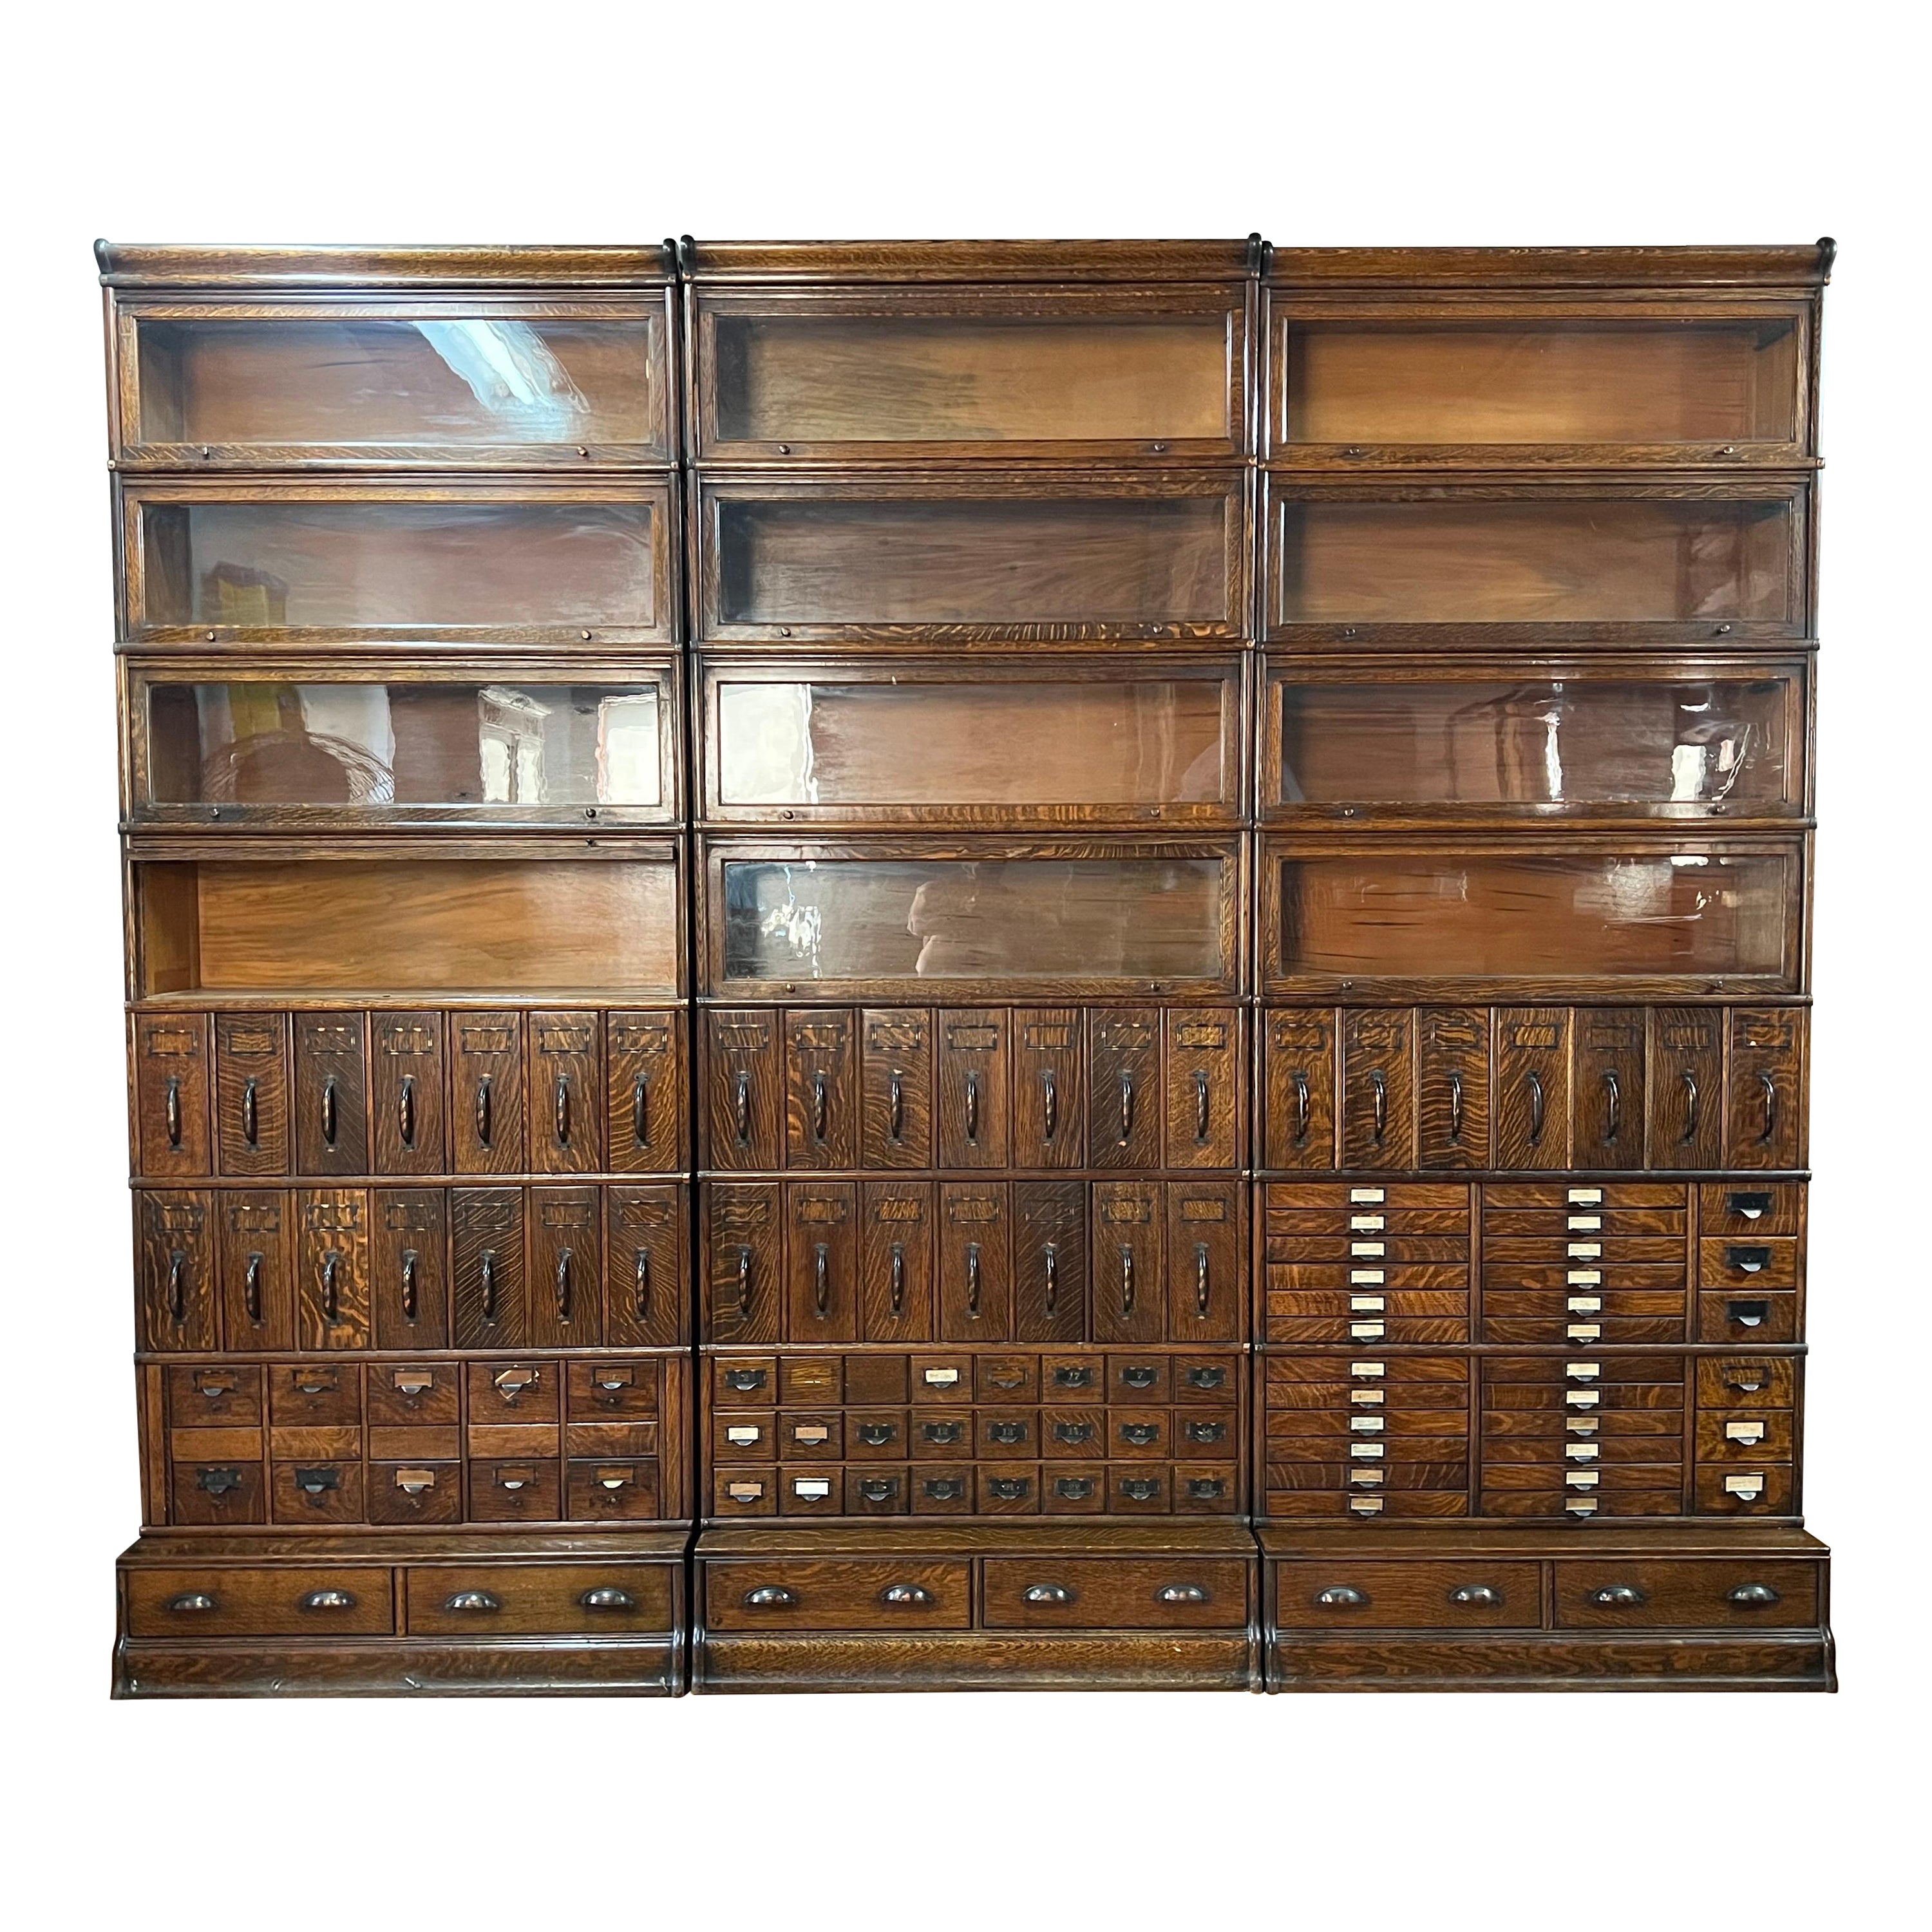 Monumental 1903 Glove Wernicke Tiger Oak Barrister Bookcases and File Cabinets